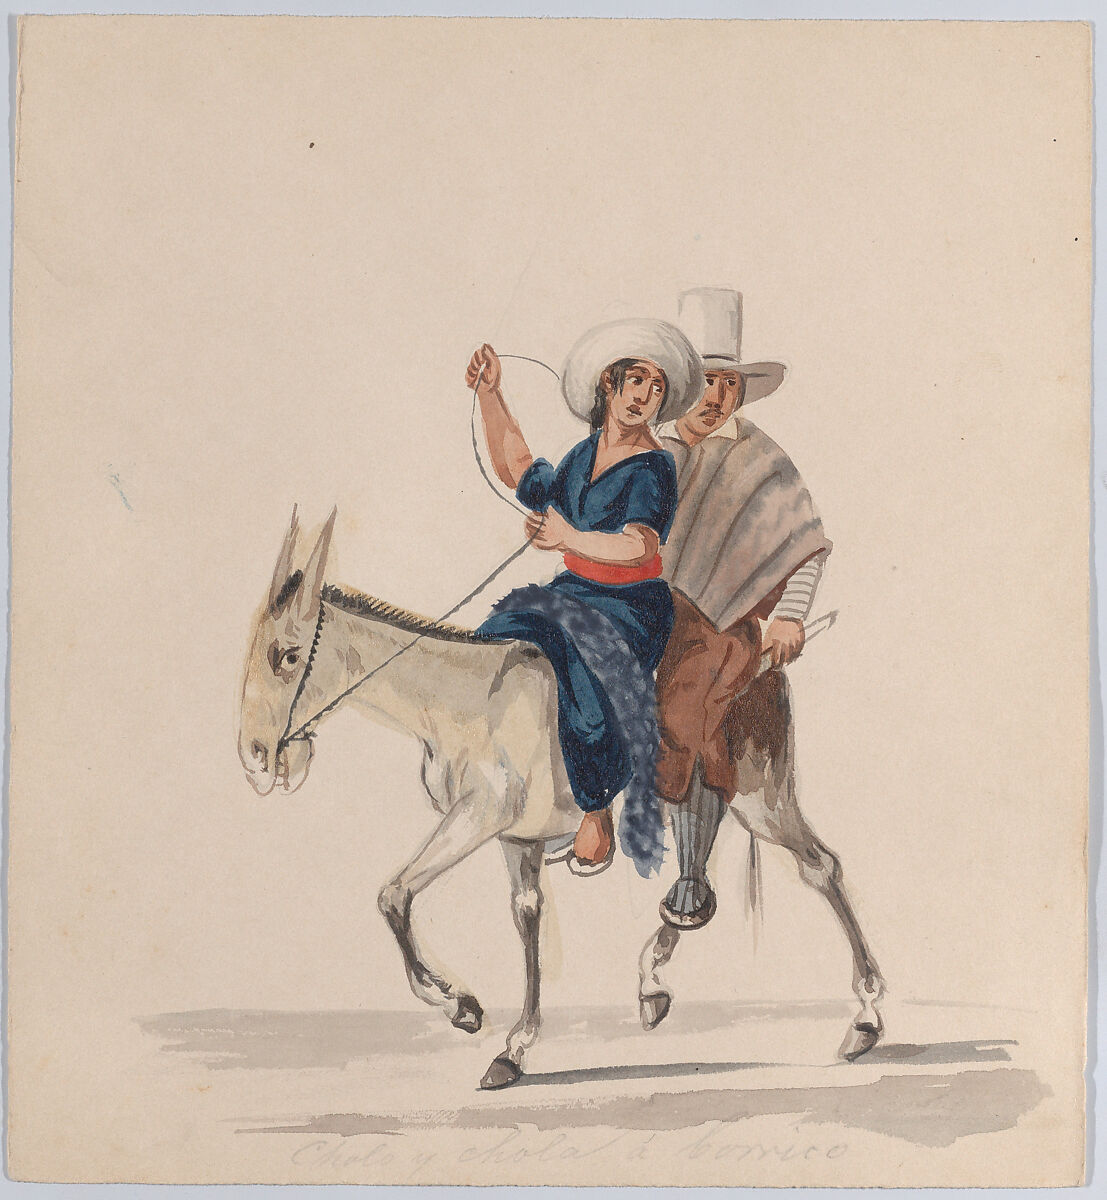 An indigenous man and woman together riding a donkey; from a group of drawings depicting Peruvian dress, Attributed to Francisco (Pancho) Fierro (African Peruvian, 1807–1879), Watercolor 